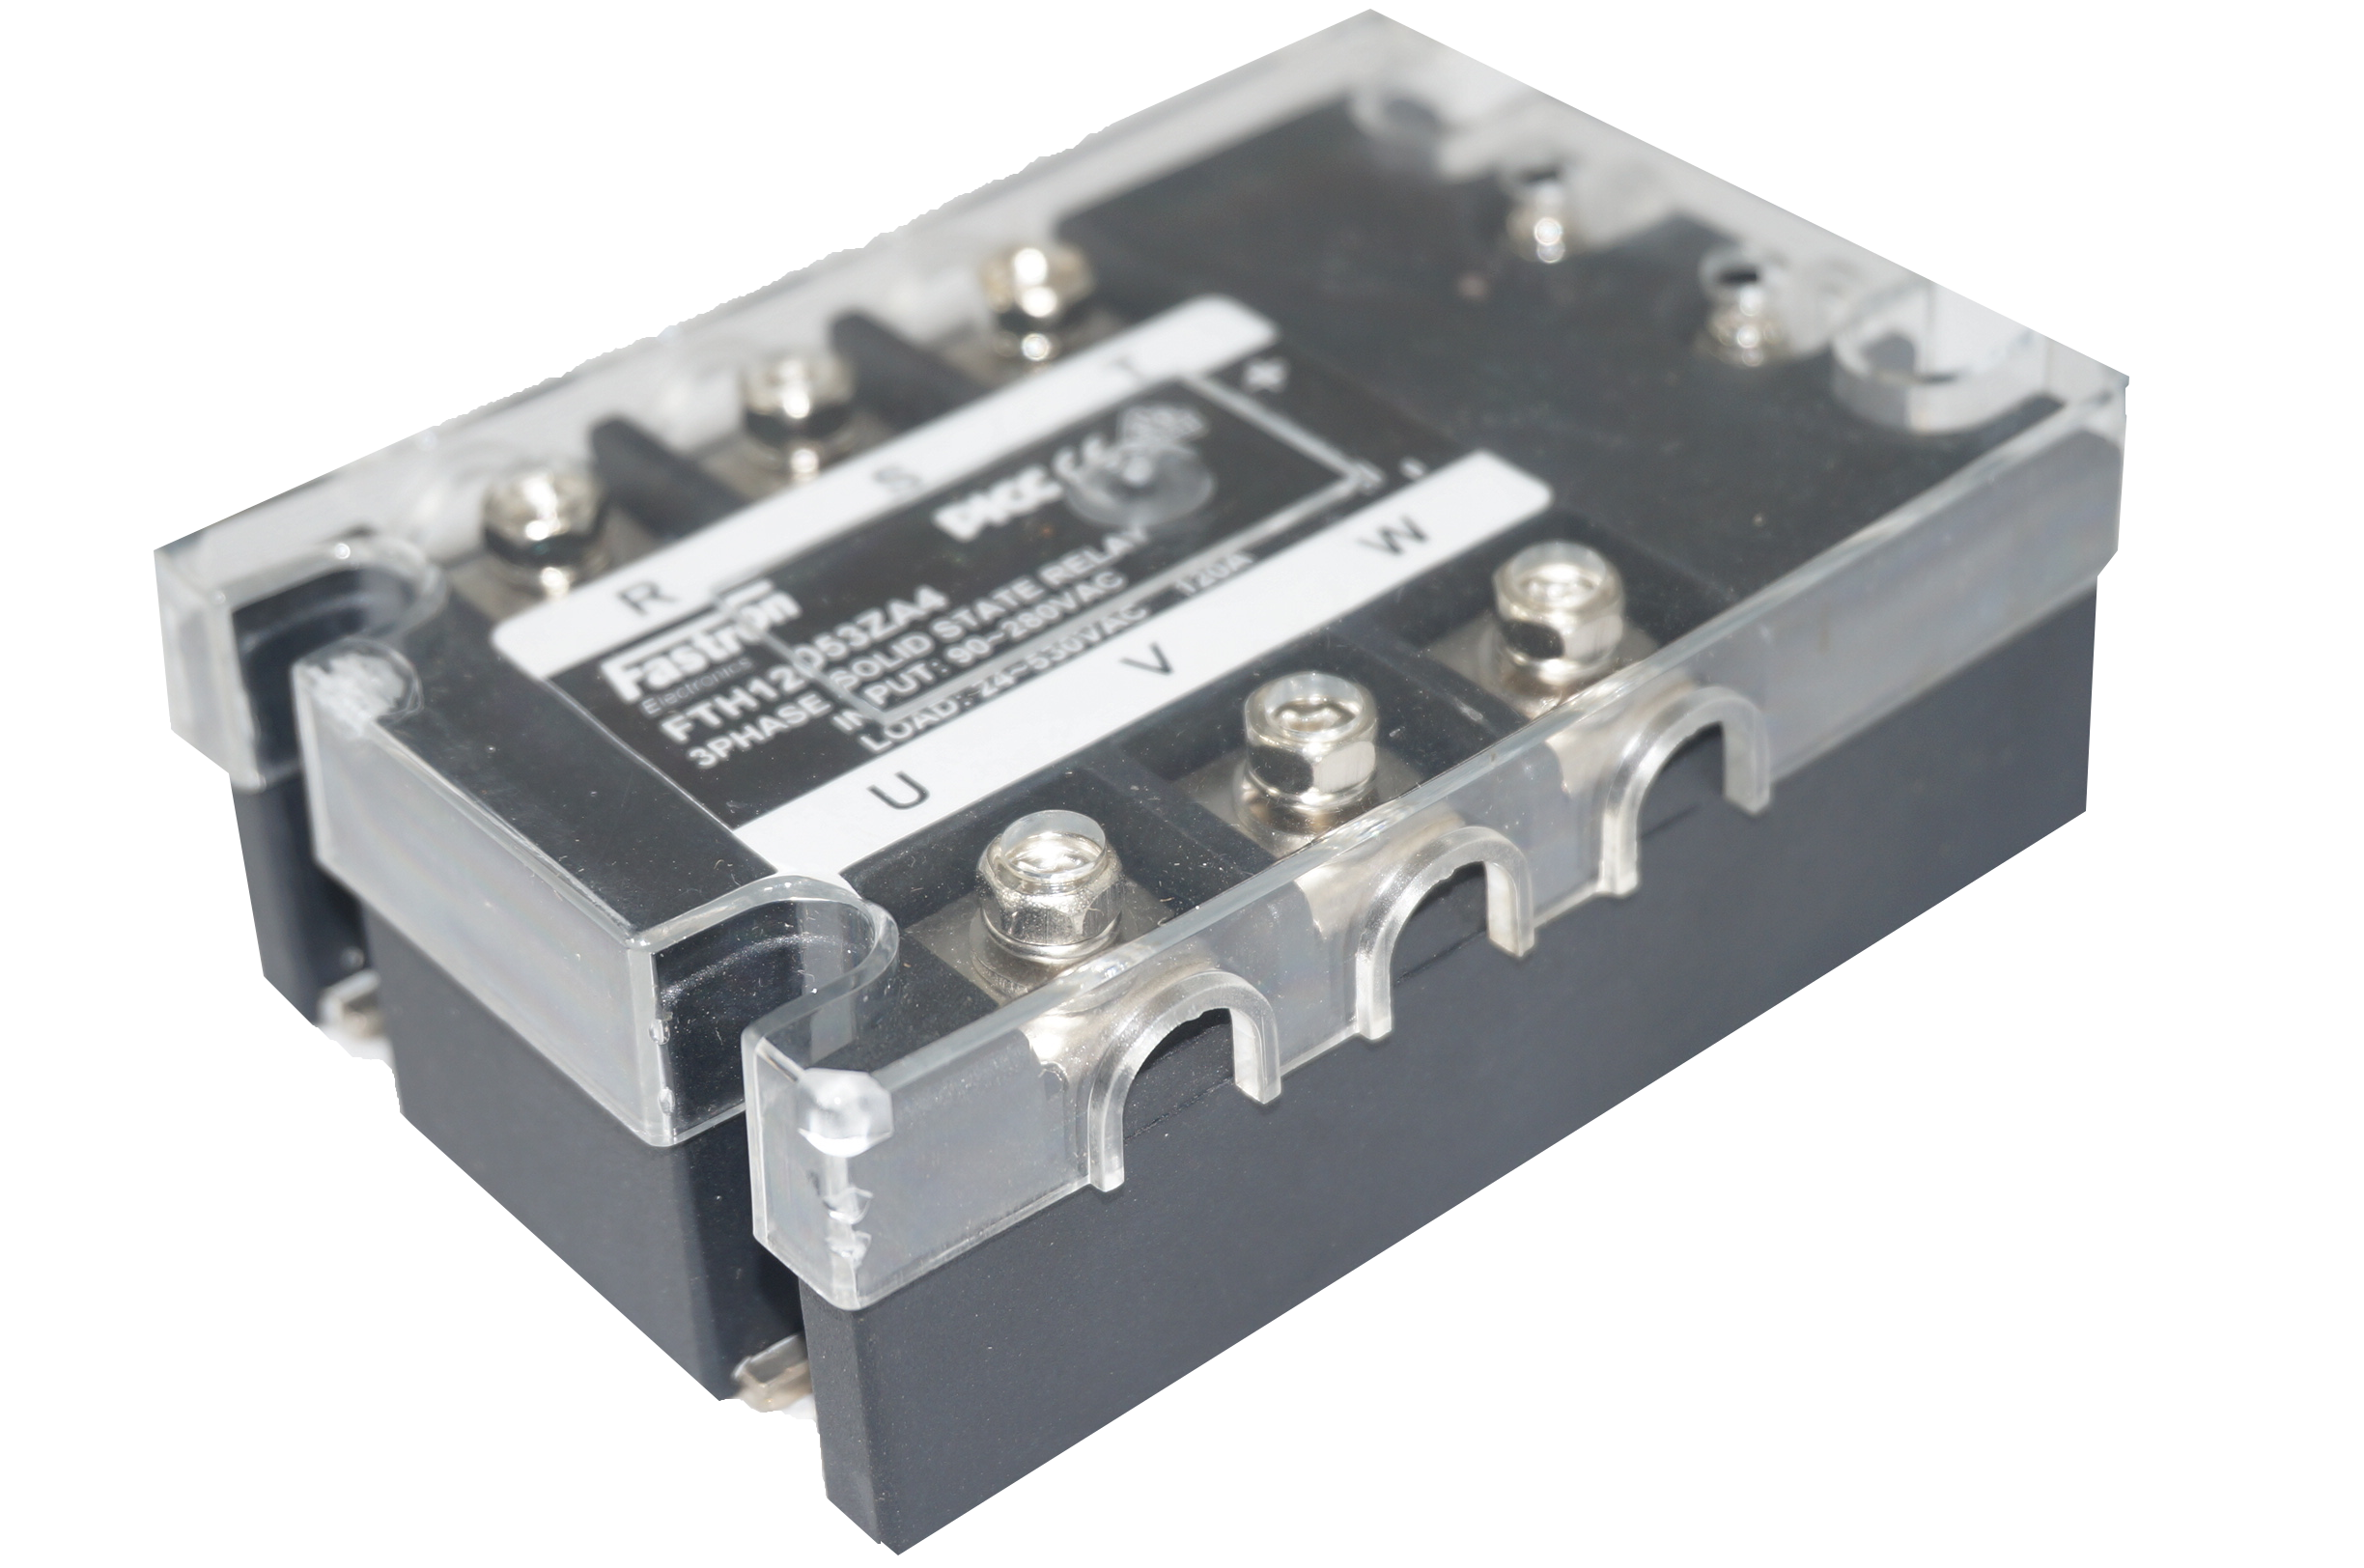 FTH6053ZD3, Solid State Relay, 3 Phase 3-32VDC Control, 60A, 70-530VAC Load, with IP20 Cover